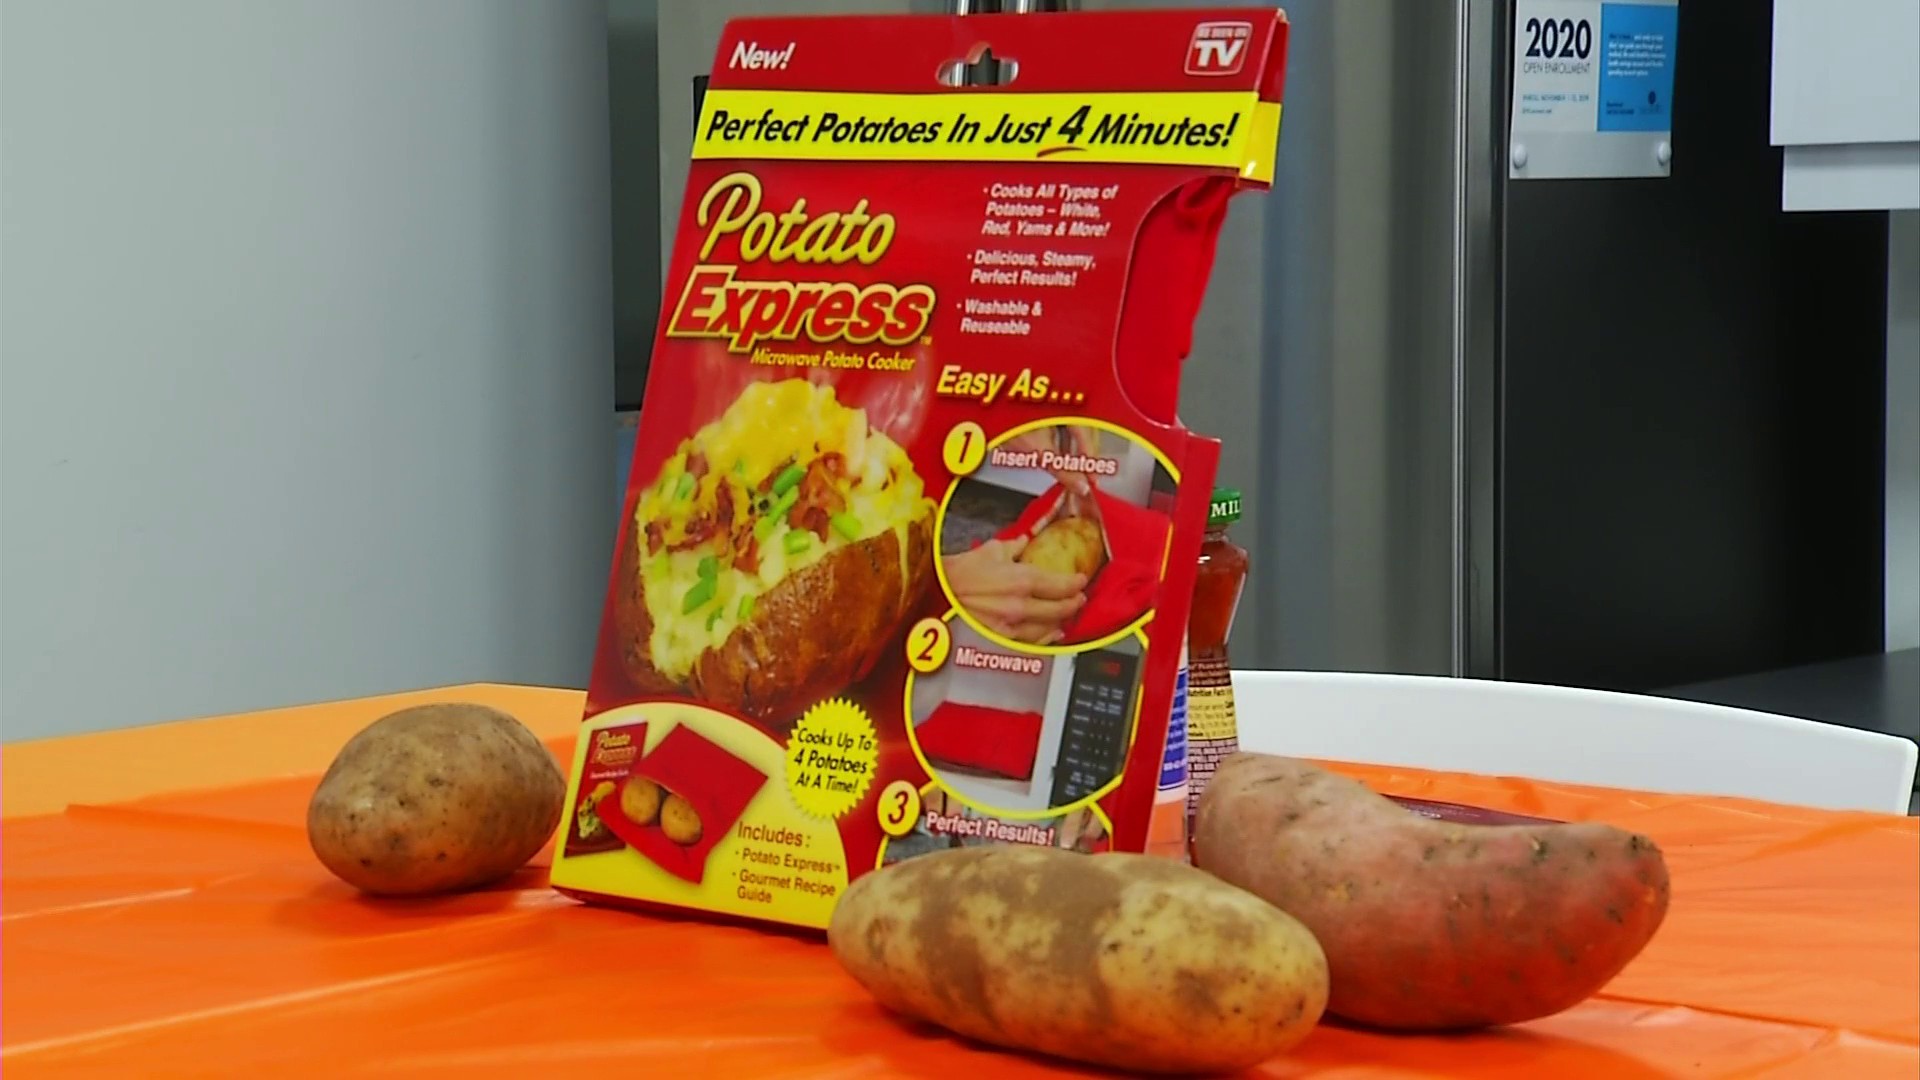 Yummy Can Potatoes Express Microwave Potato Cooker - Best